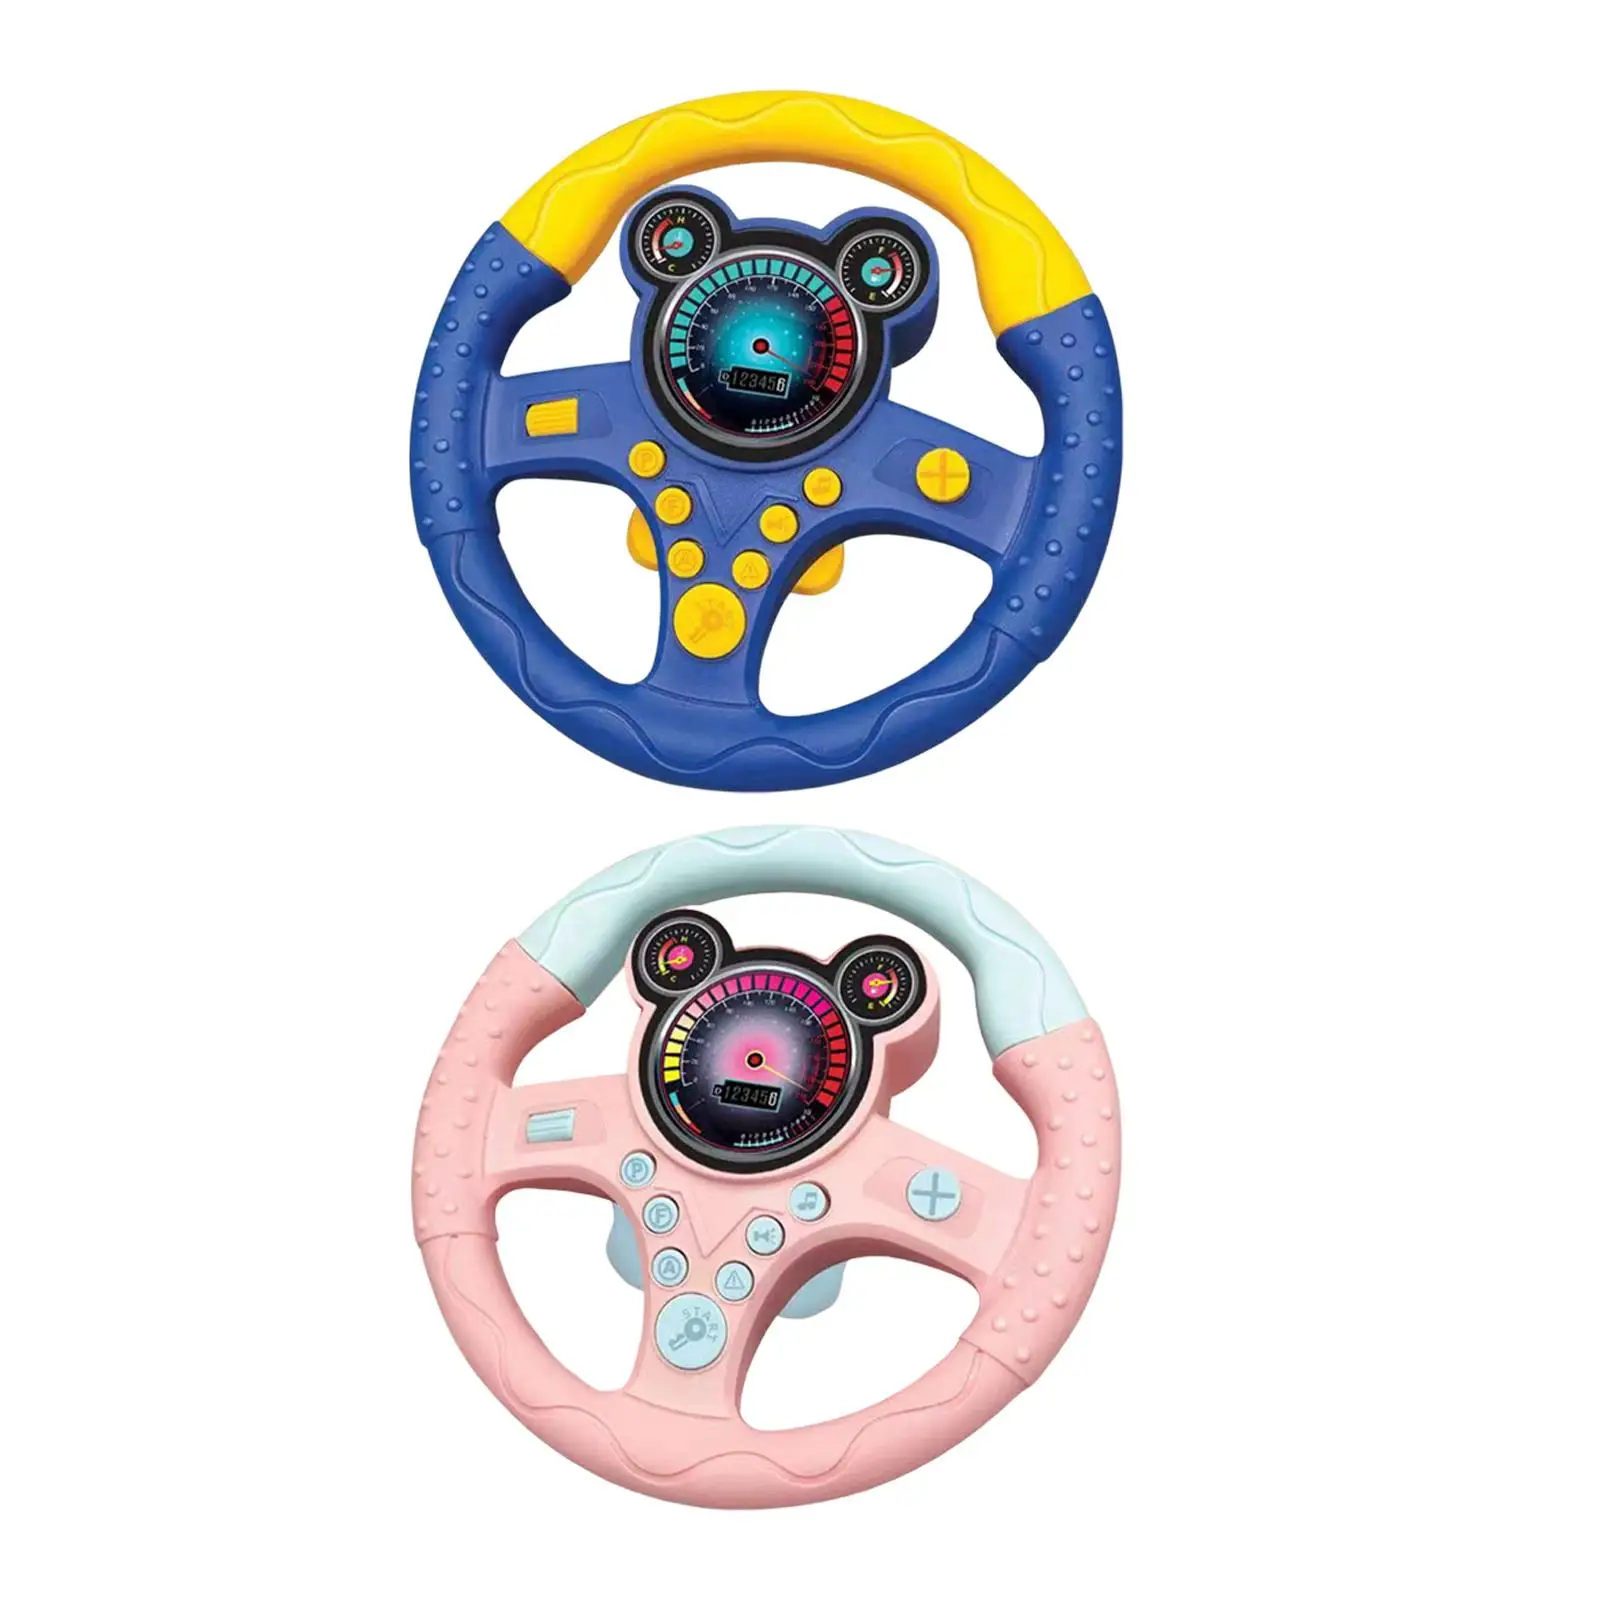 Simulation Car Driving Toys Electric Wheel Toy for Garden Climbing Frame